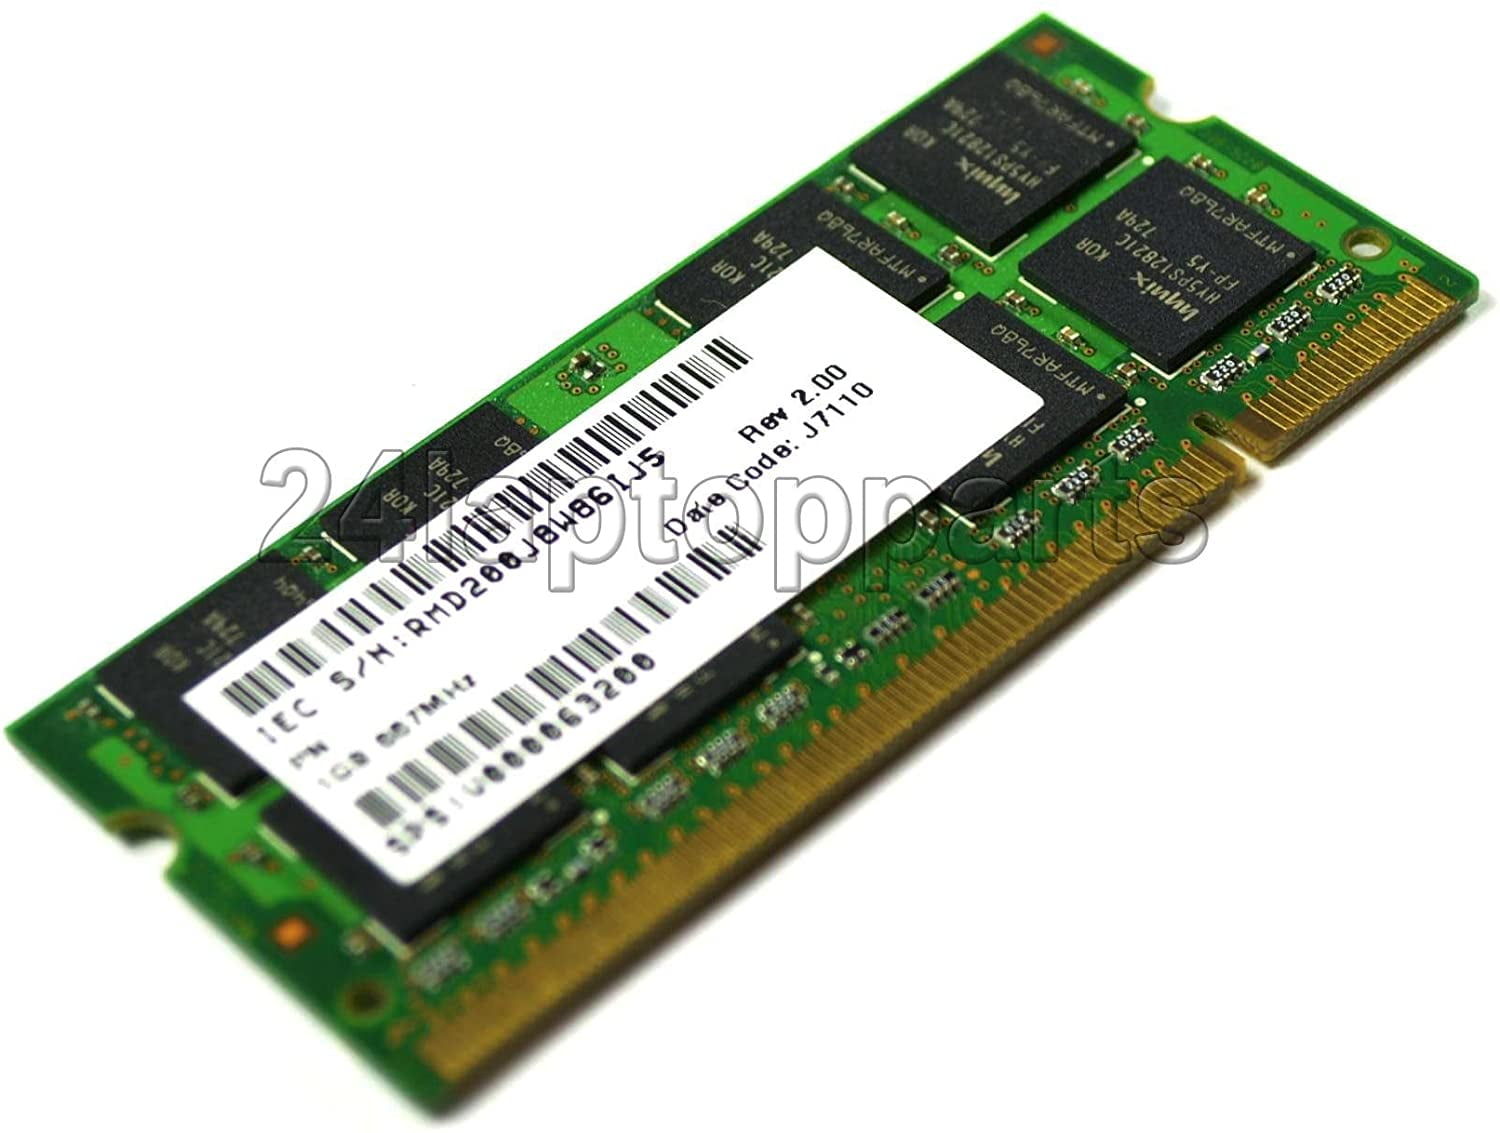 Arch Memory 2 GB 200-Pin DDR2 So-dimm RAM for Dell Vostro 2510 Intel Core 2 Duo 2.0 GHz